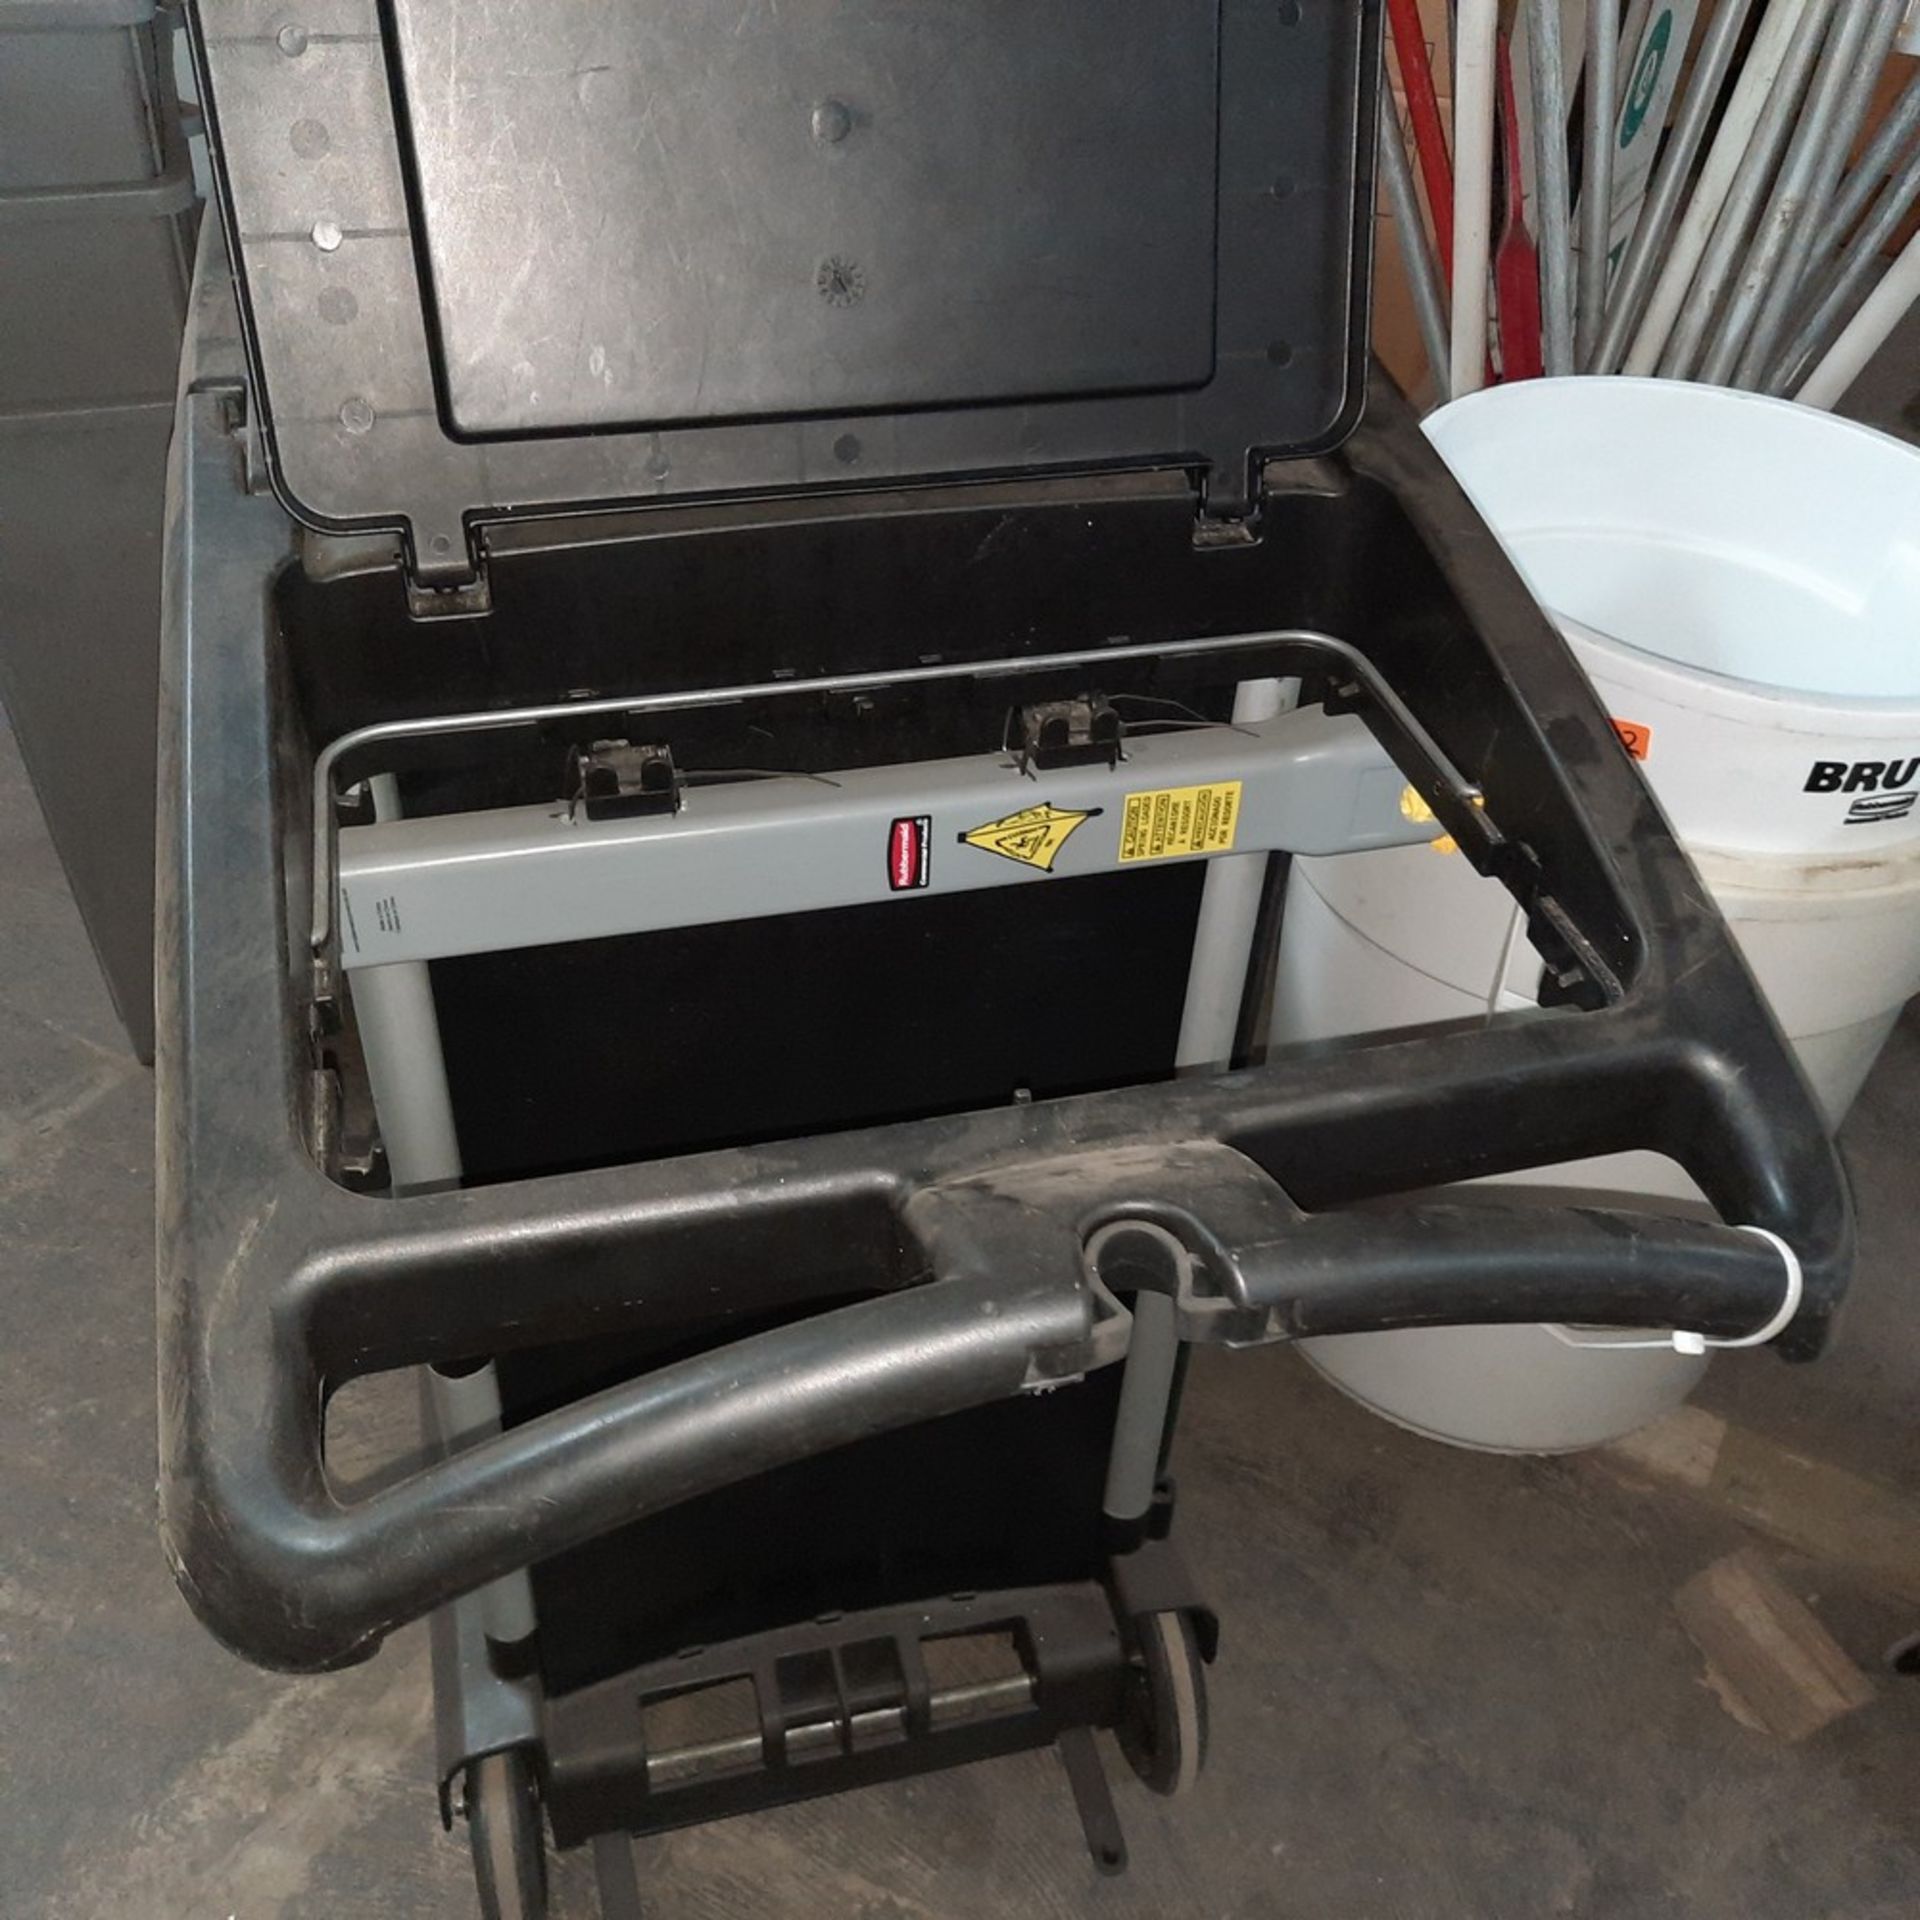 Deluxe RUBBERMAID Janitorial Cart - Image 4 of 5